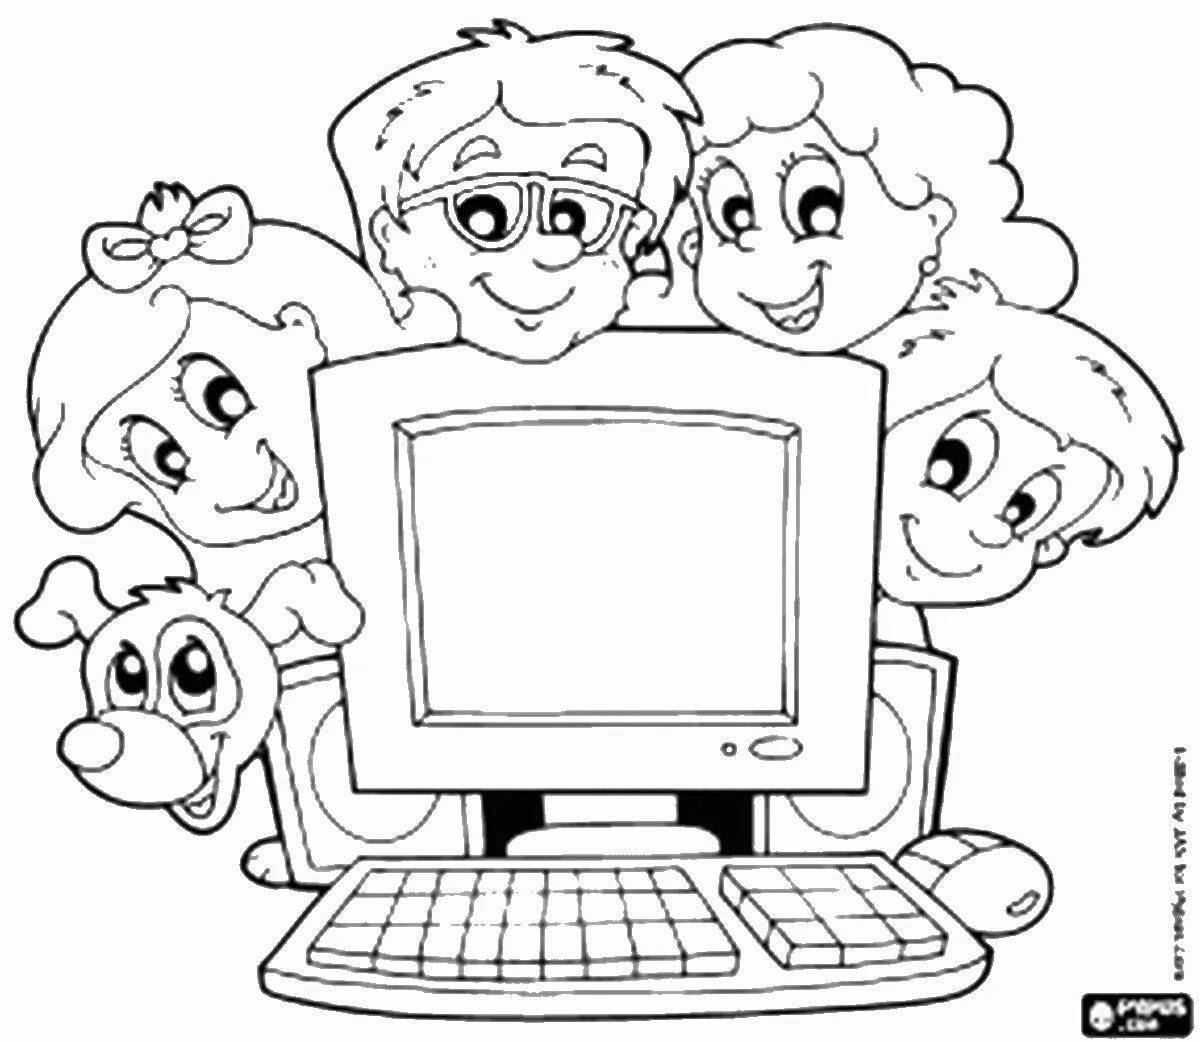 Internet safety inspirational coloring book